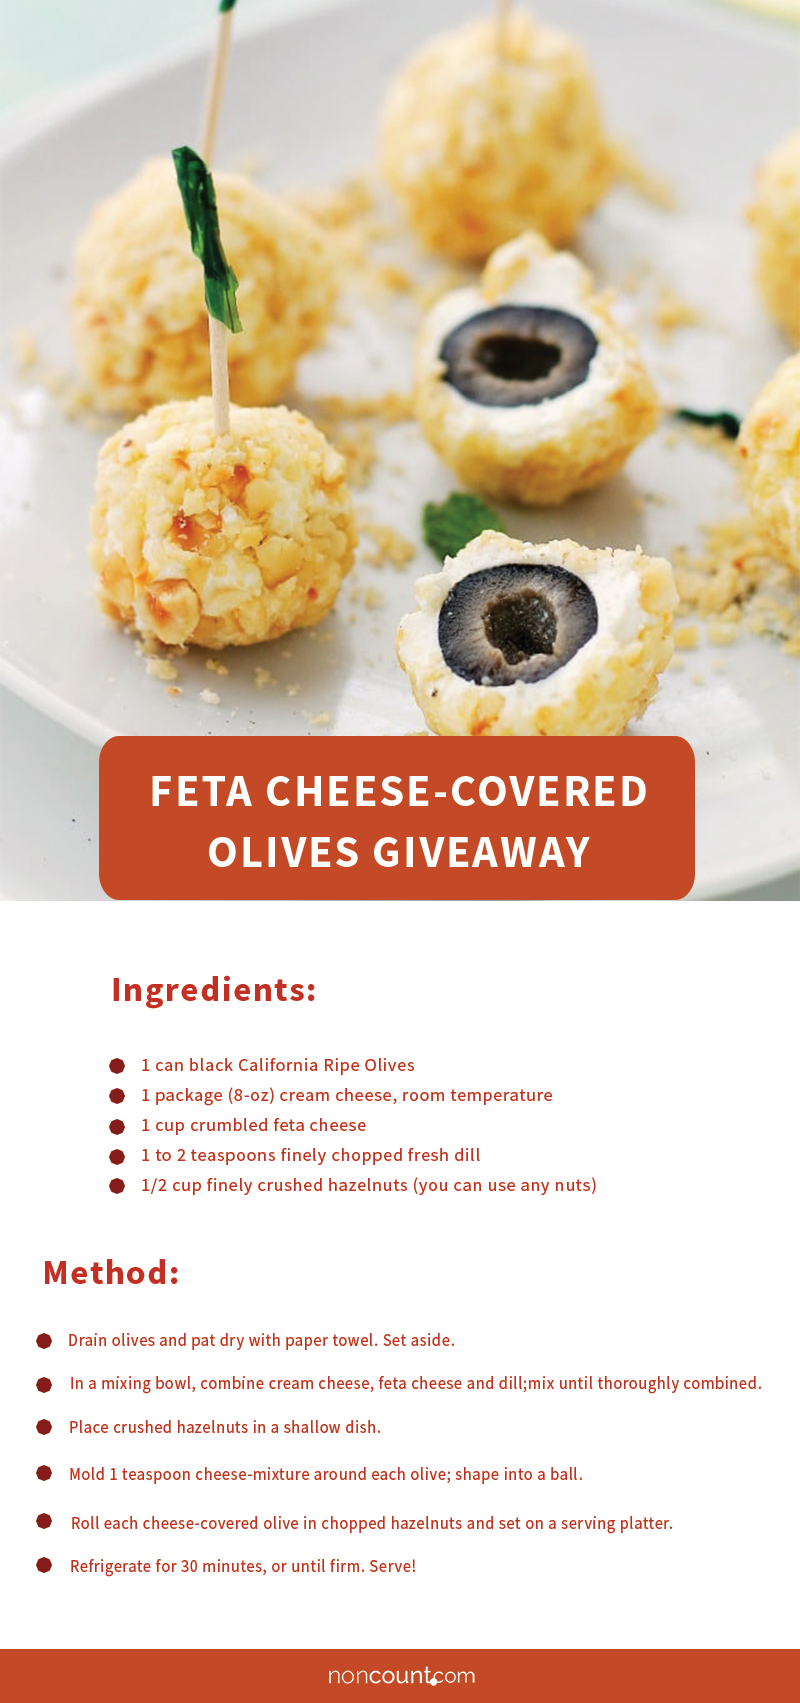 Feta Cheese-Covered Olives Giveaway